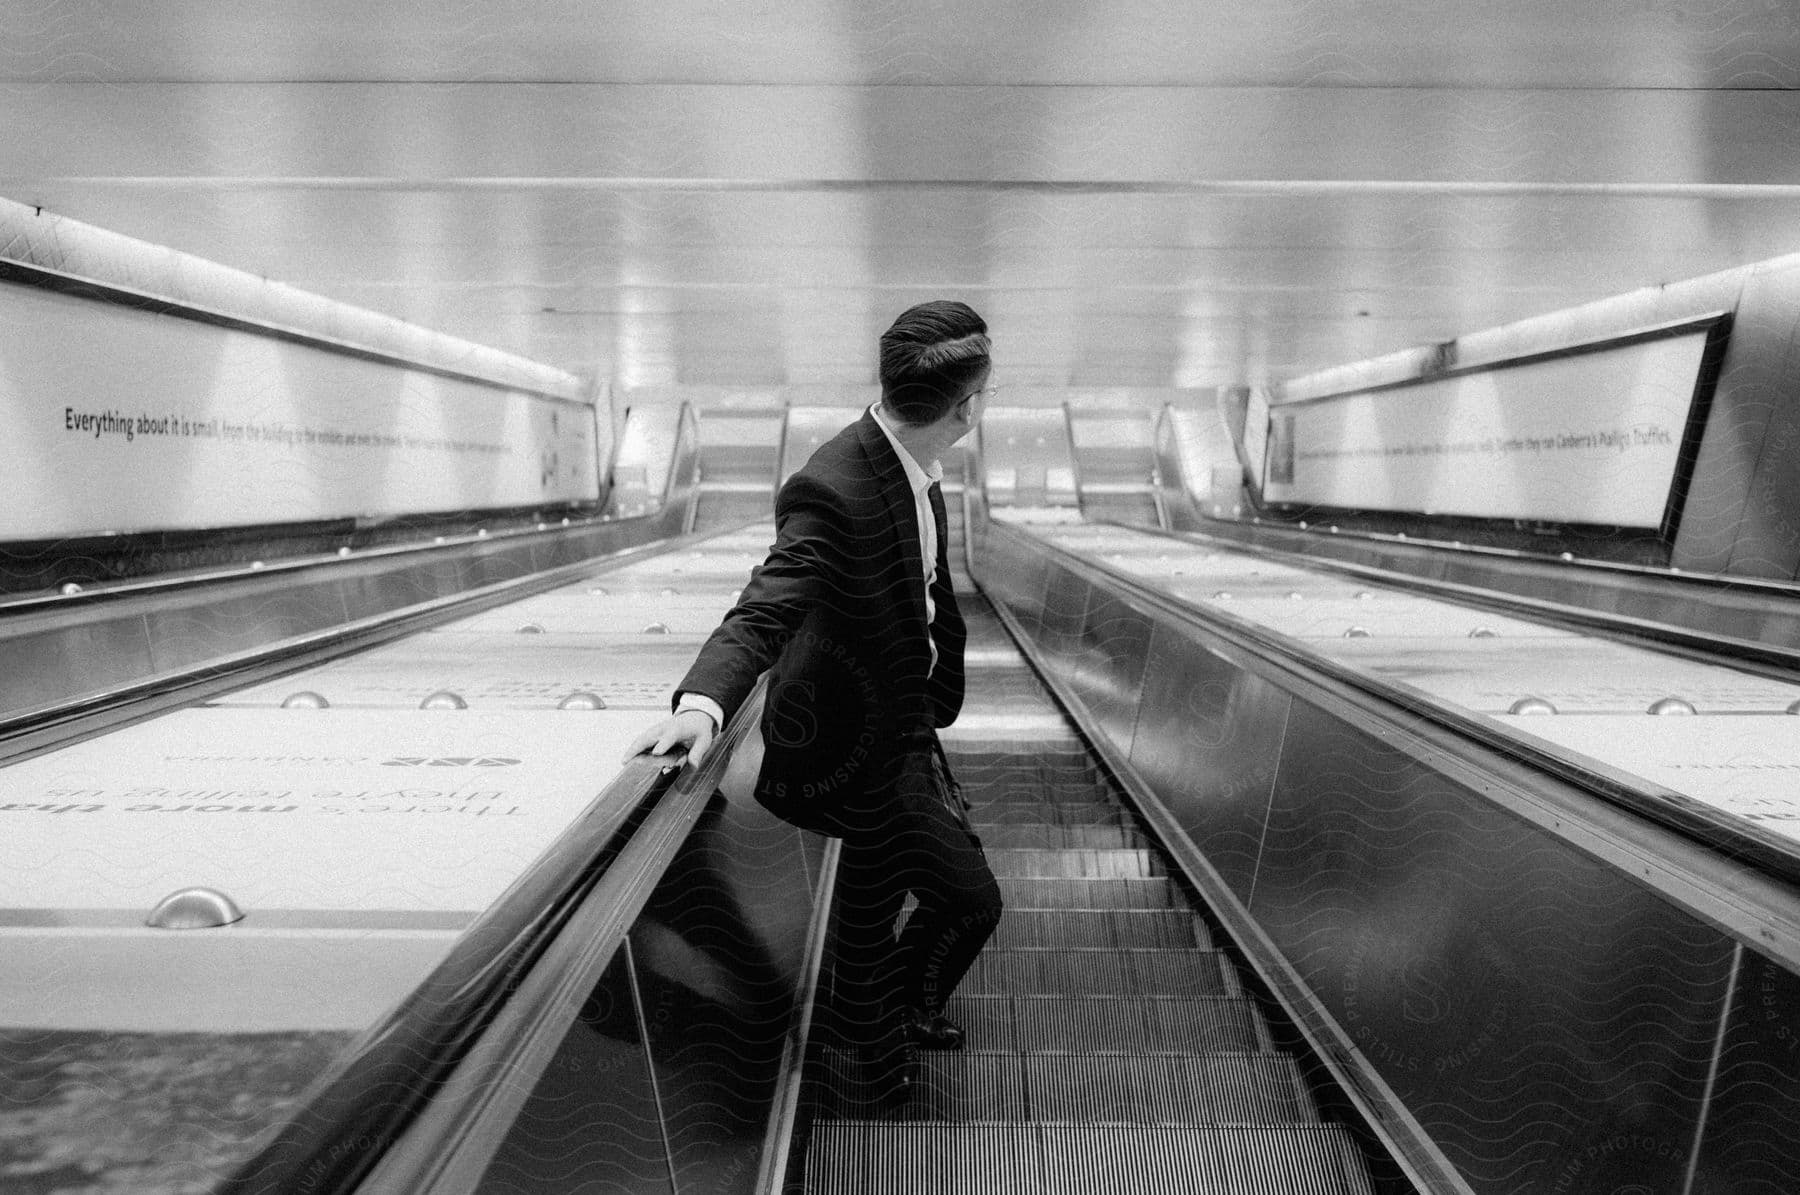 a man on suit riding on an escalator